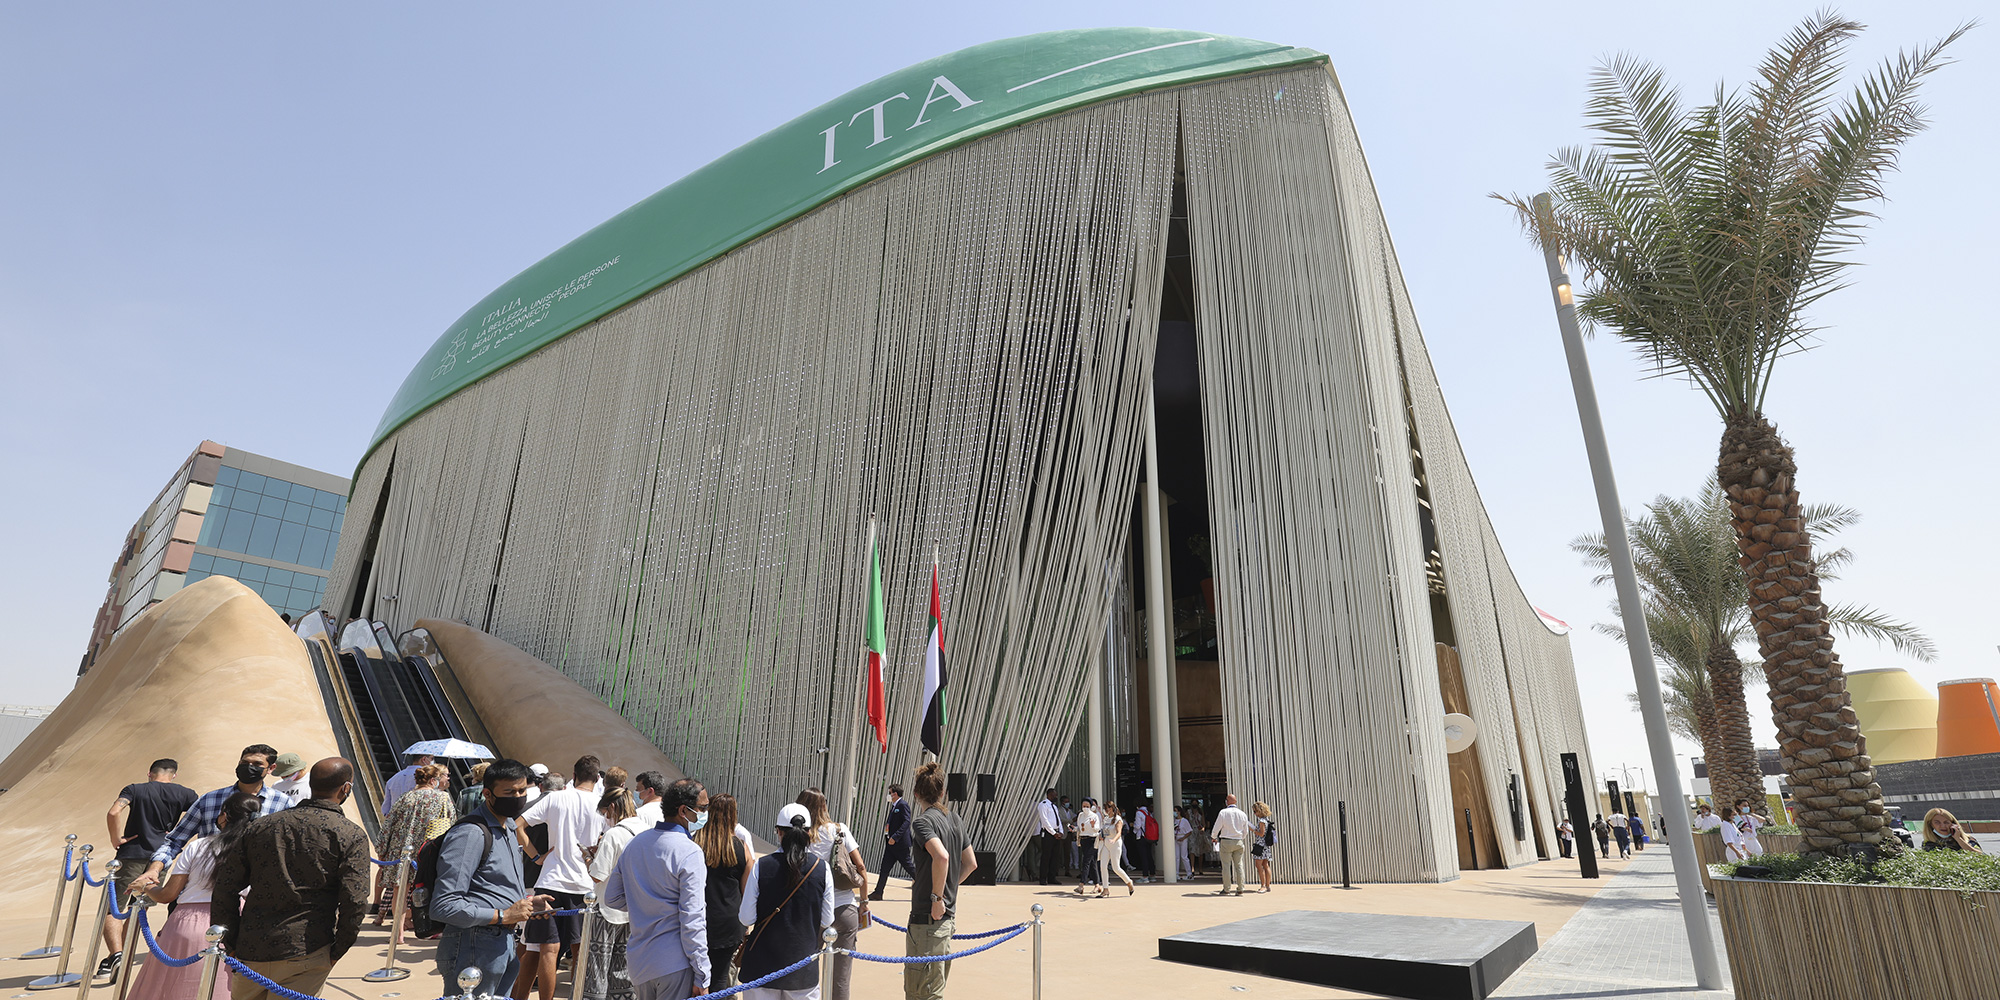 Italian Pavilion by day